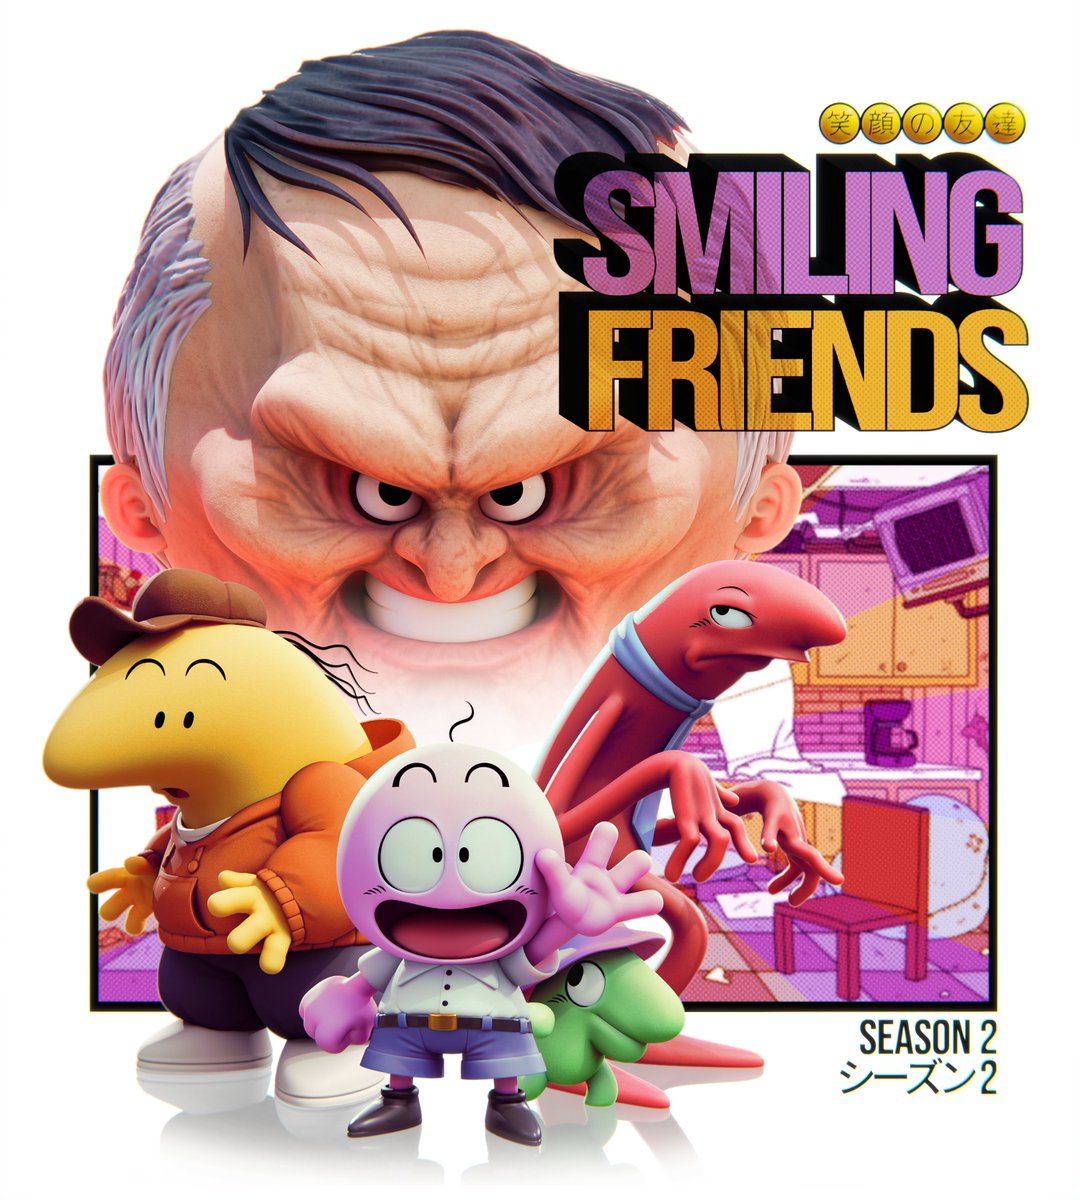 OH YEAH BABY SMILING FRIENDS TIME!!!!! #smilingfriends